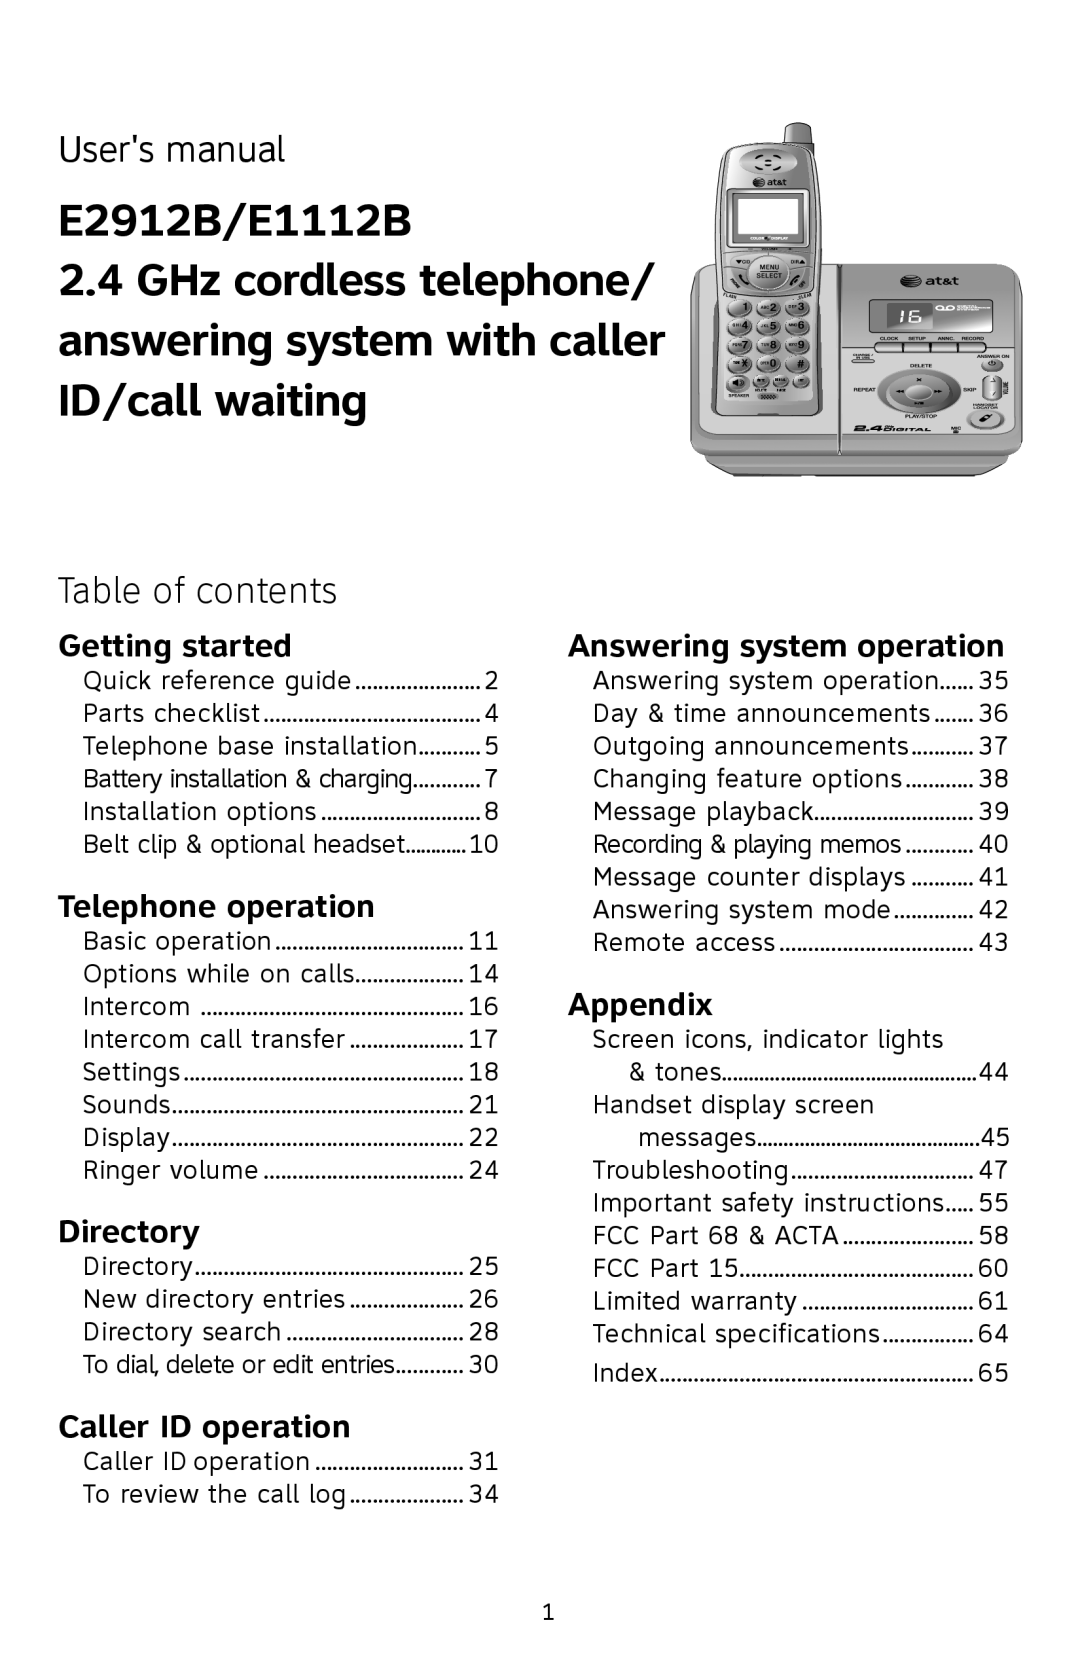 AT&T E2912 Users manual, Table of contents, Getting started, Telephone operation, Directory, Answering system operation 